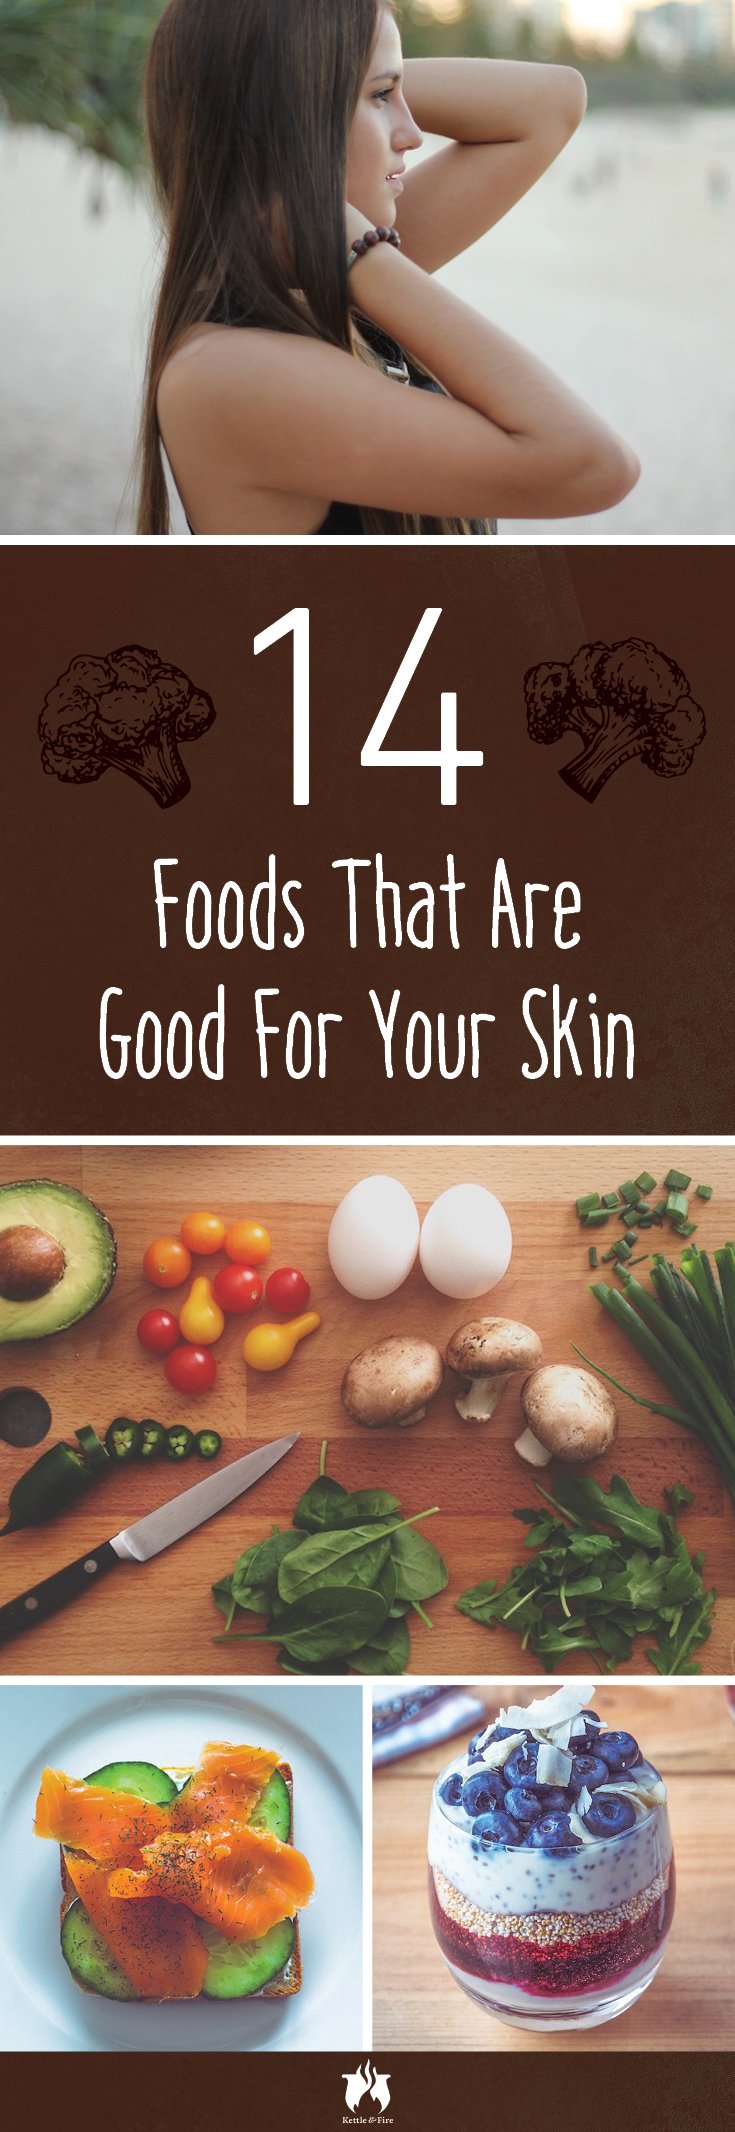 When it comes to skin health, there’s no cream, gel or exfoliator equivalent can do what a healthy diet does. Learn 14 foods that are good for your skin!